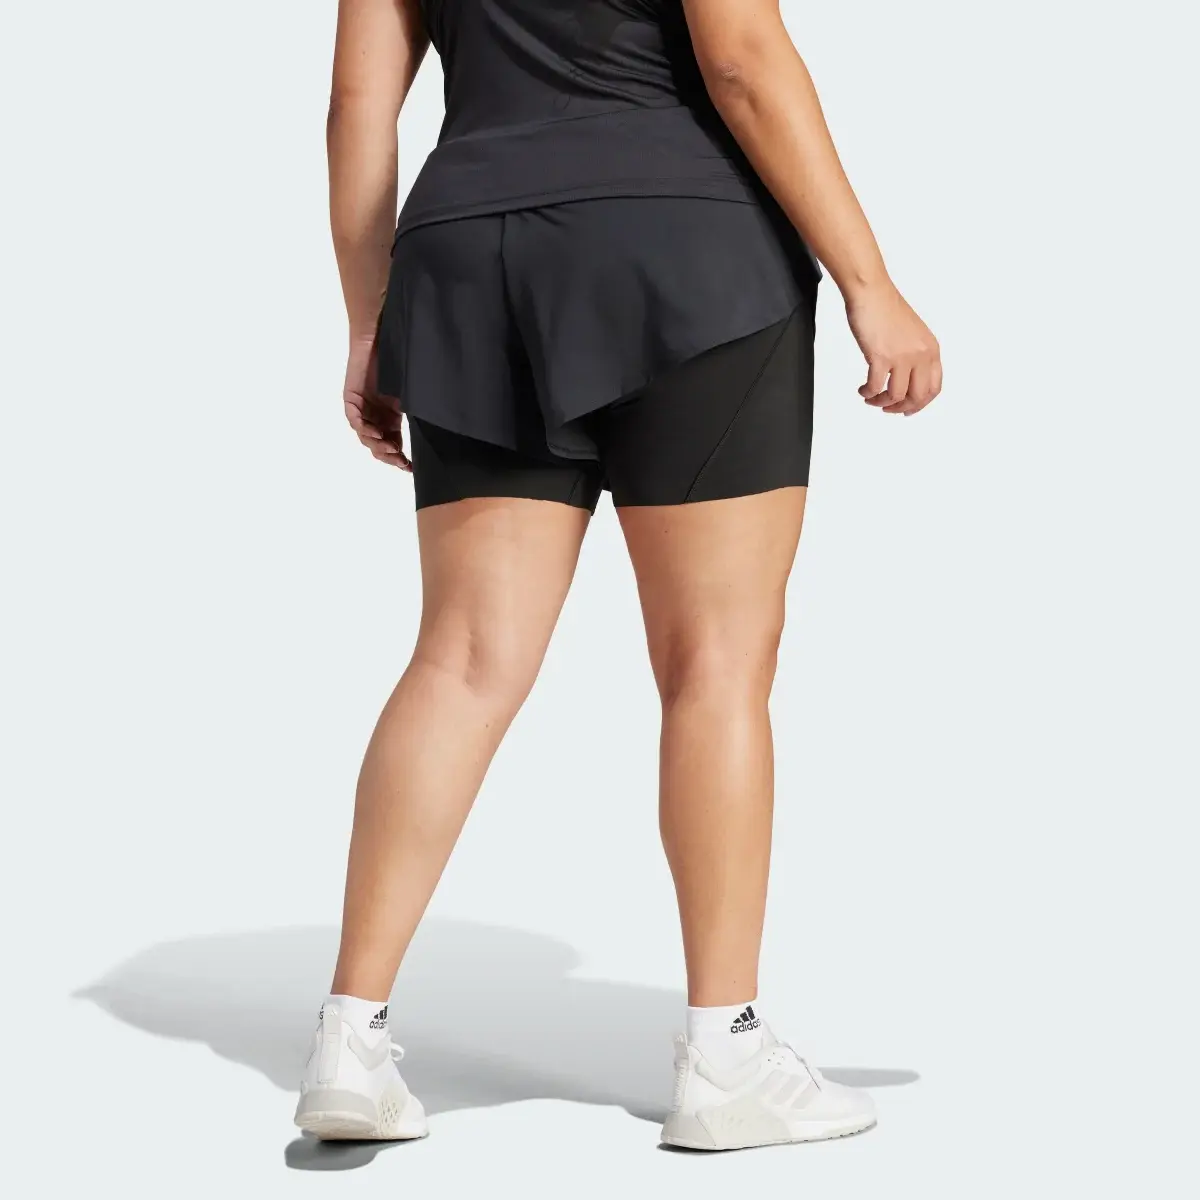 Adidas Designed for Training 2-in-1 Shorts (Plus Size). 2